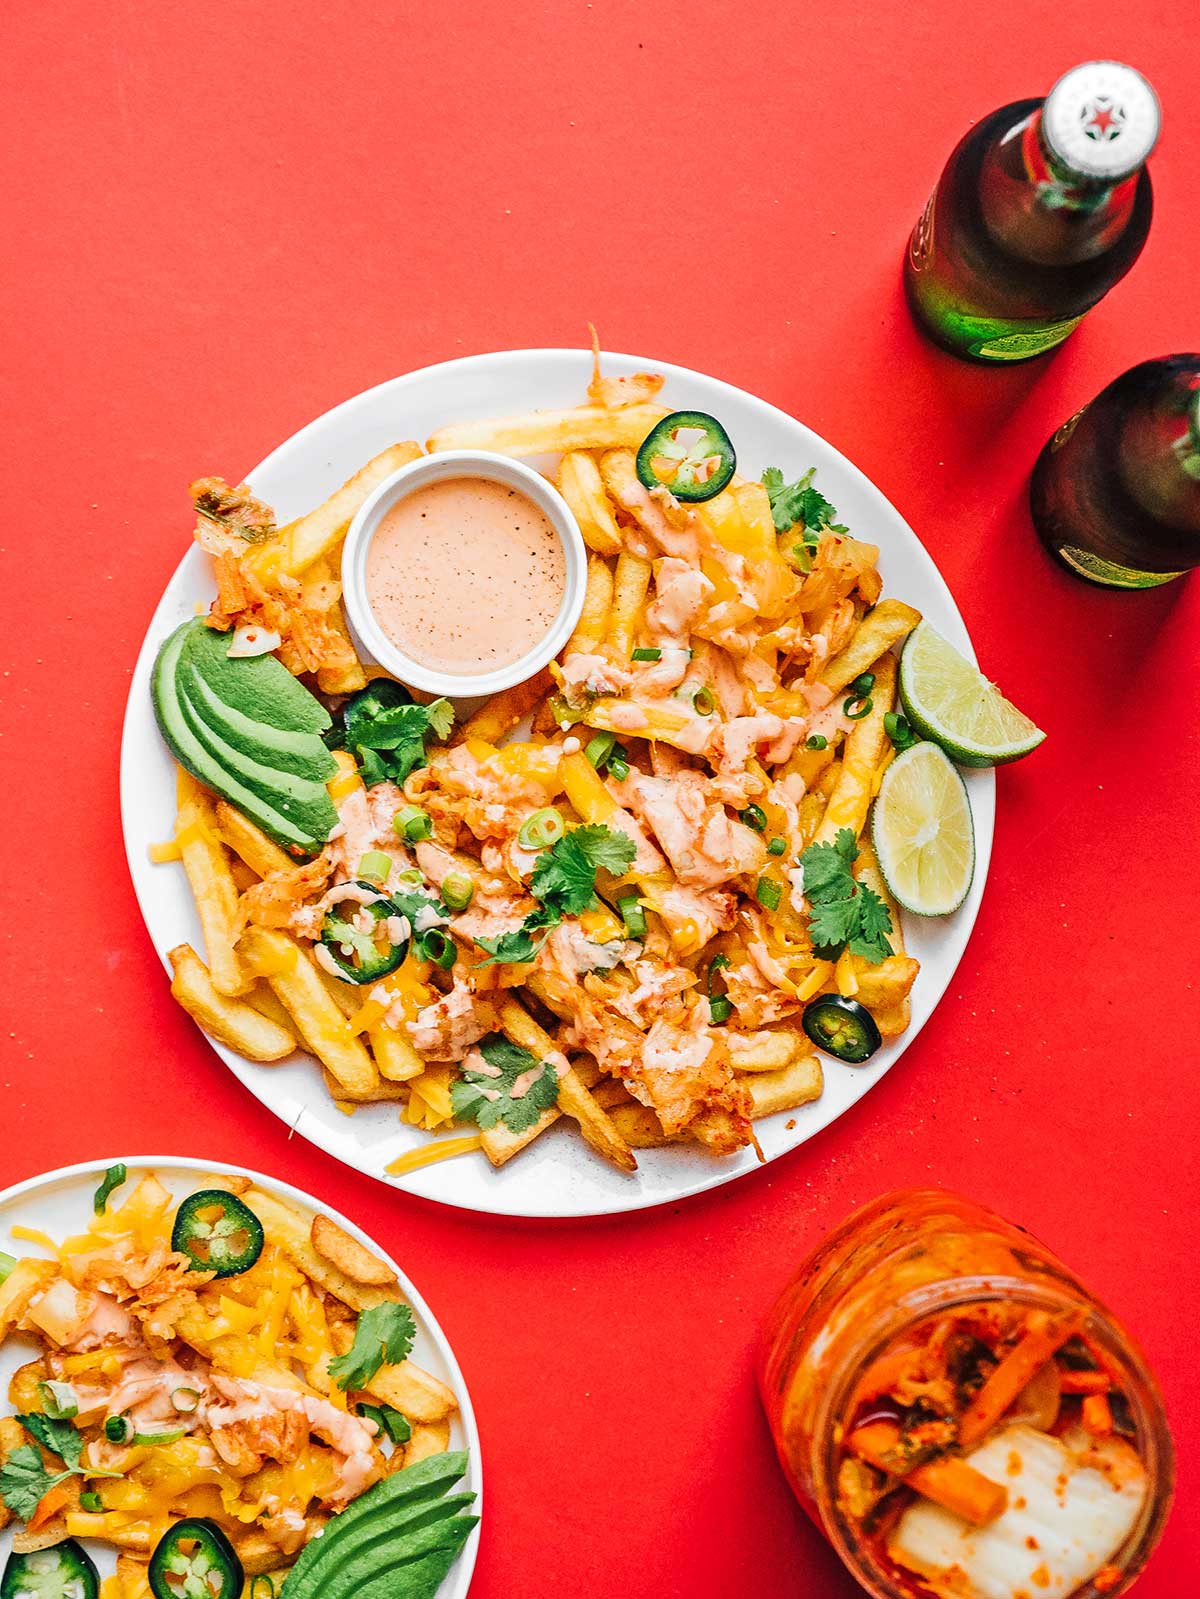 Bird's eye photo of kimchi fries, sauce, avocado slices, lime slices, and toppings on a plate on a red background